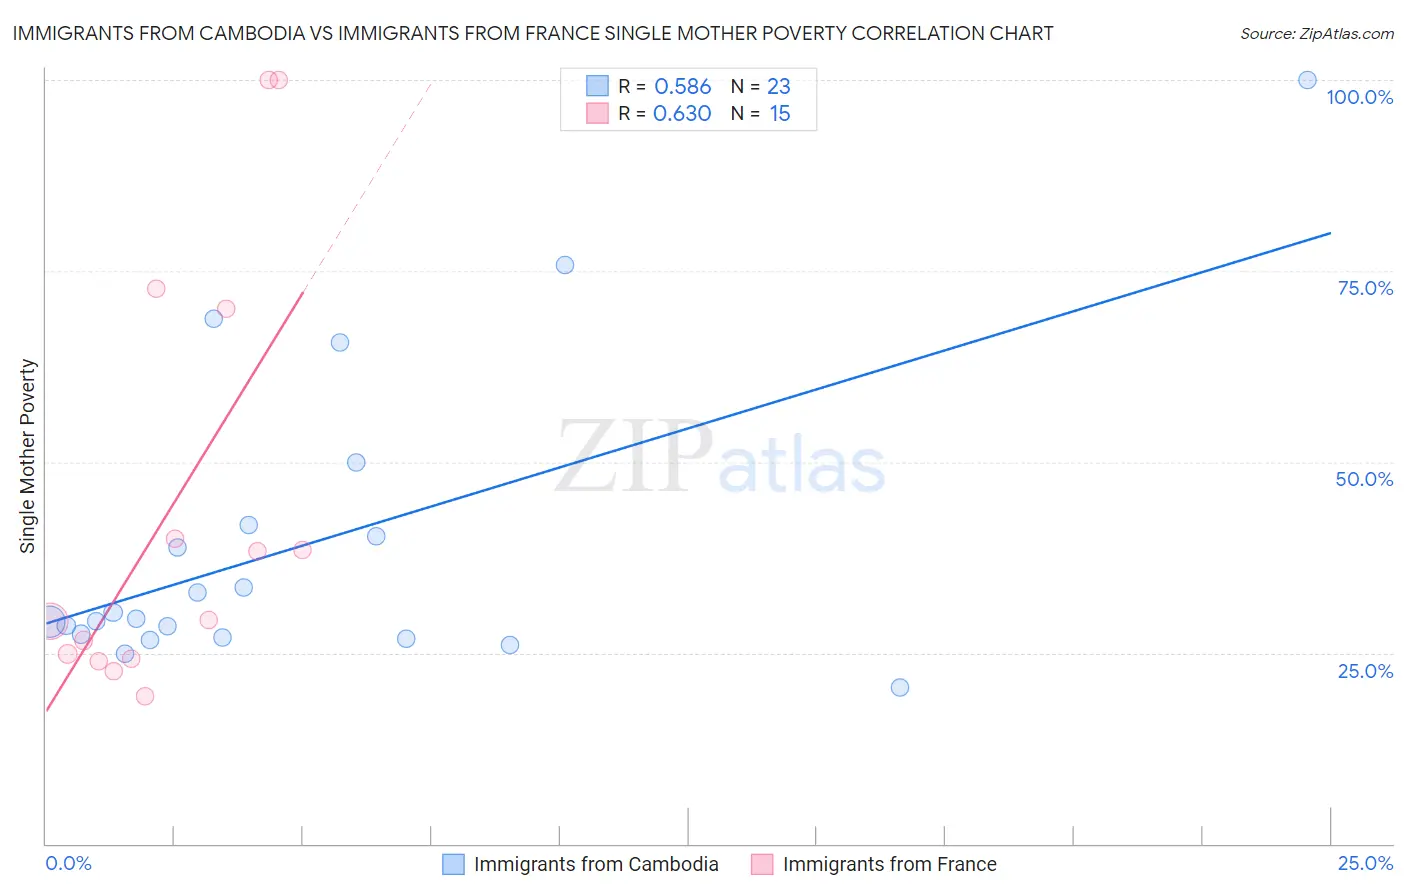 Immigrants from Cambodia vs Immigrants from France Single Mother Poverty